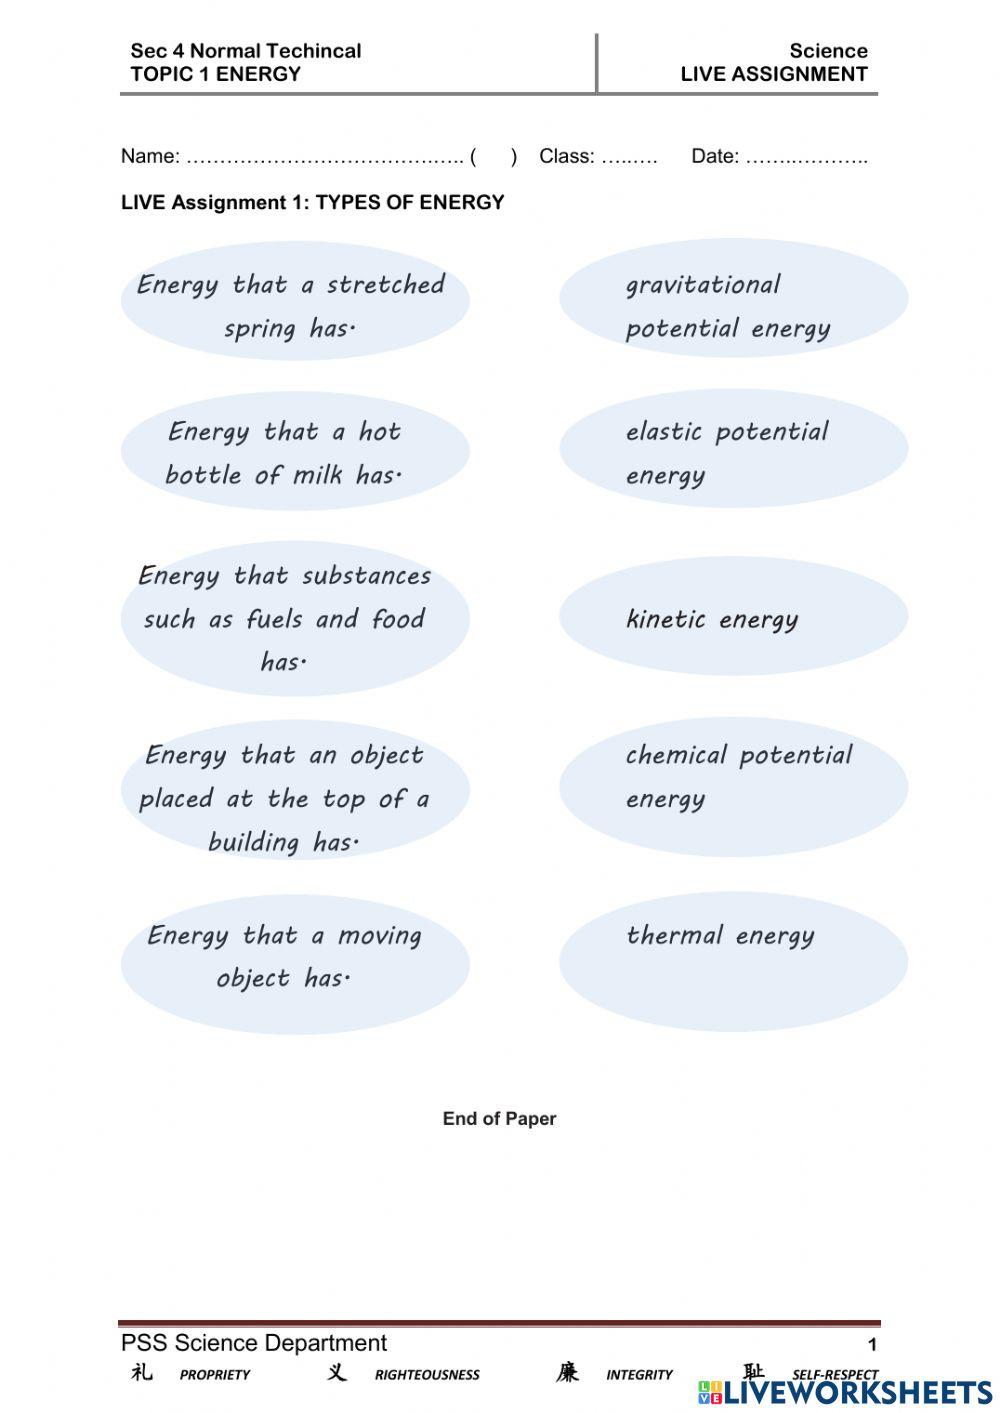 live assignment 1 types of energy-all